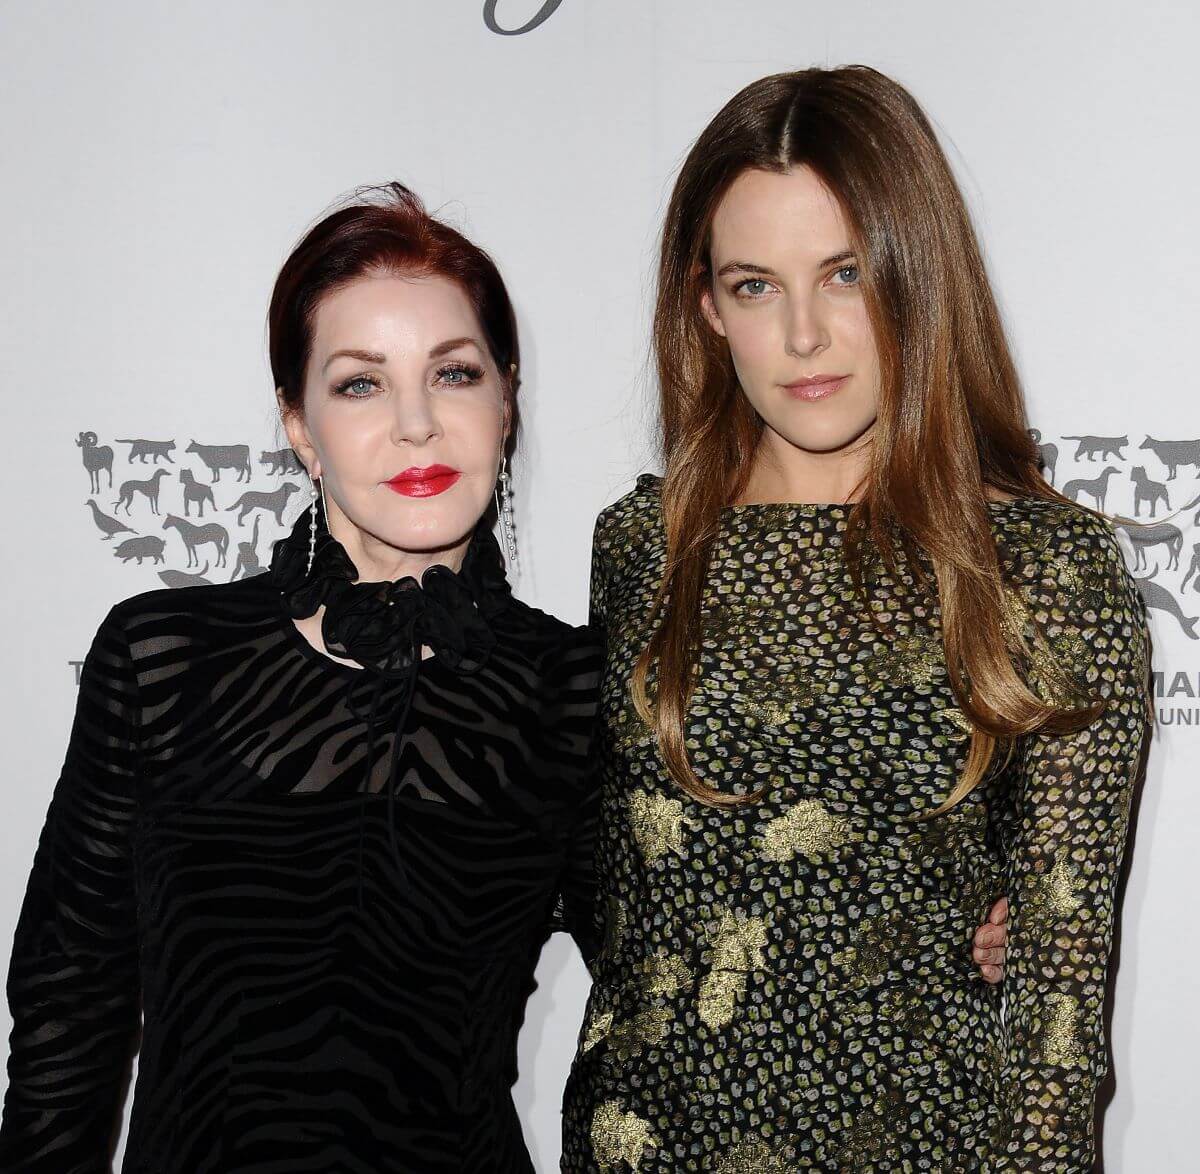 Lisa Marie Presley wears black and stands with her arm around Riley Keough, who wears green.